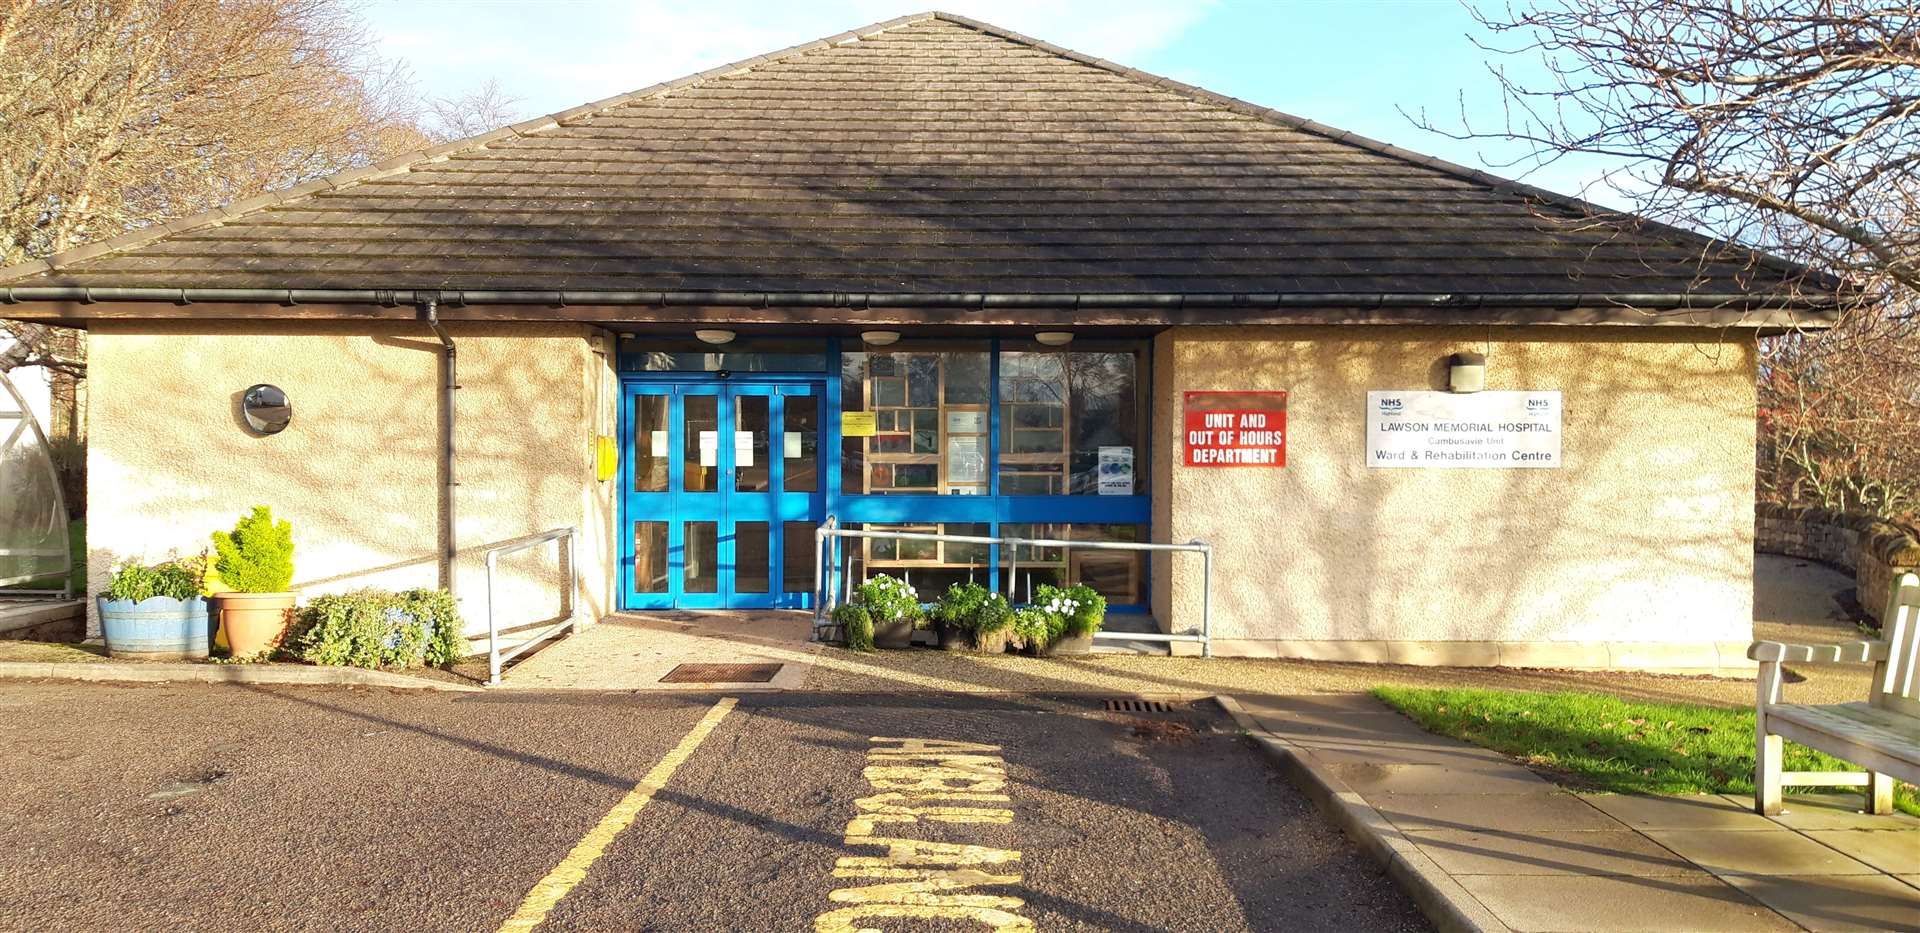 The Minor Injuries Unit, which is housed in the Cambusavie Unit at the Lawson Memorial Hospital, Golspie, has still to reopen following the pandemic.